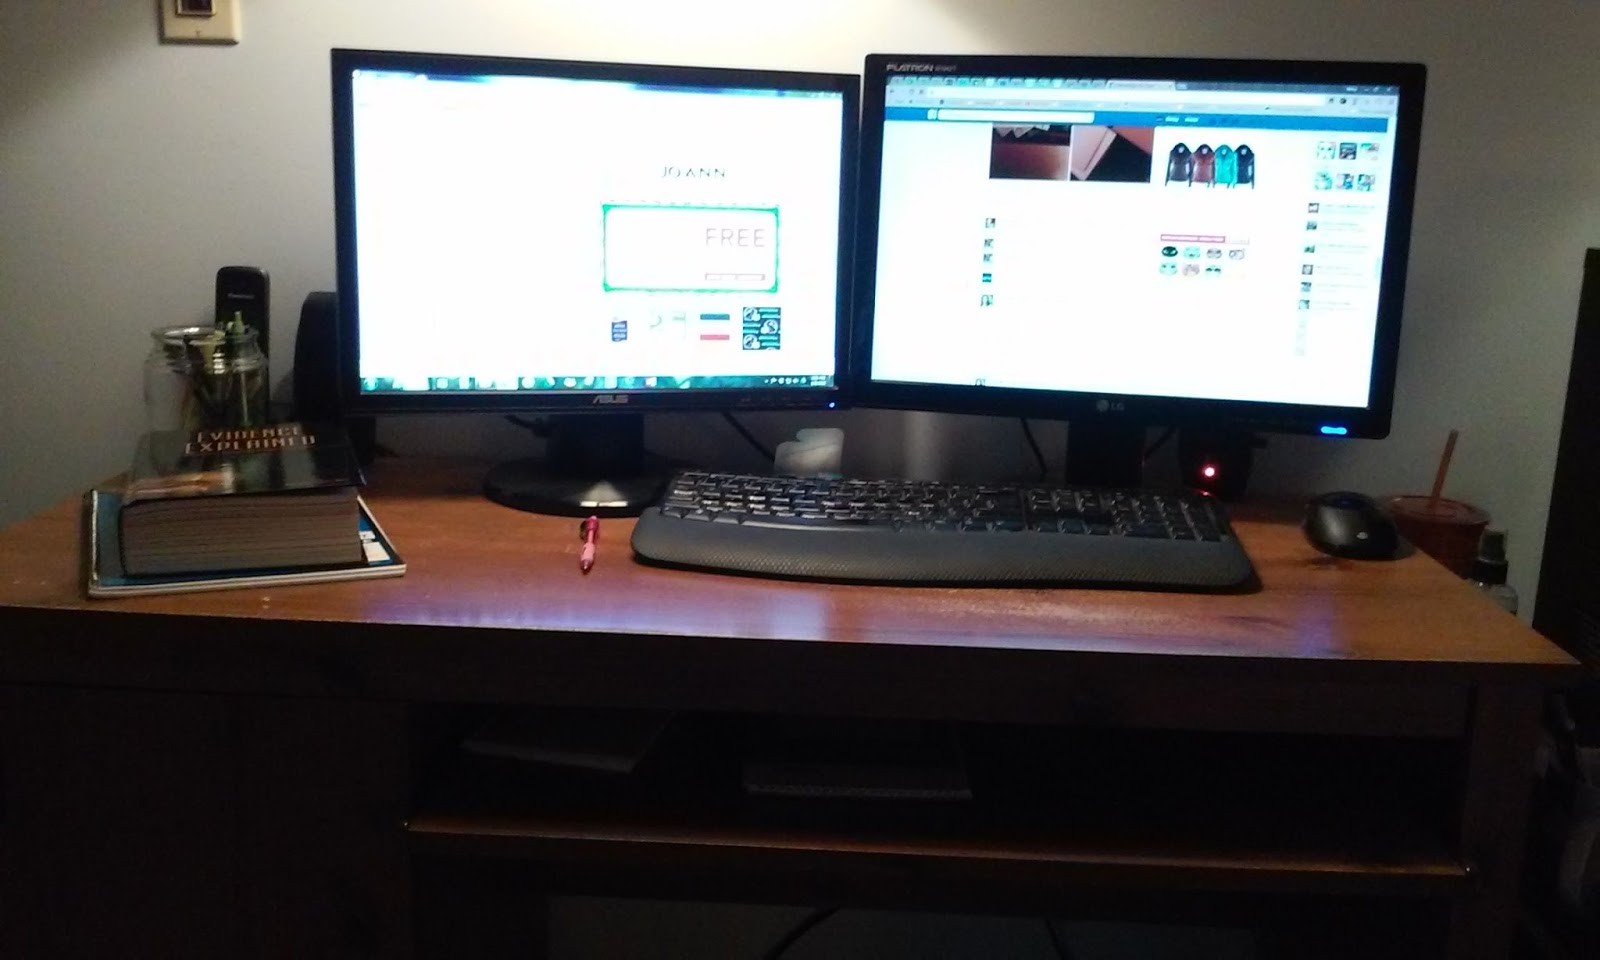 Why is everything on my computer screen so big?